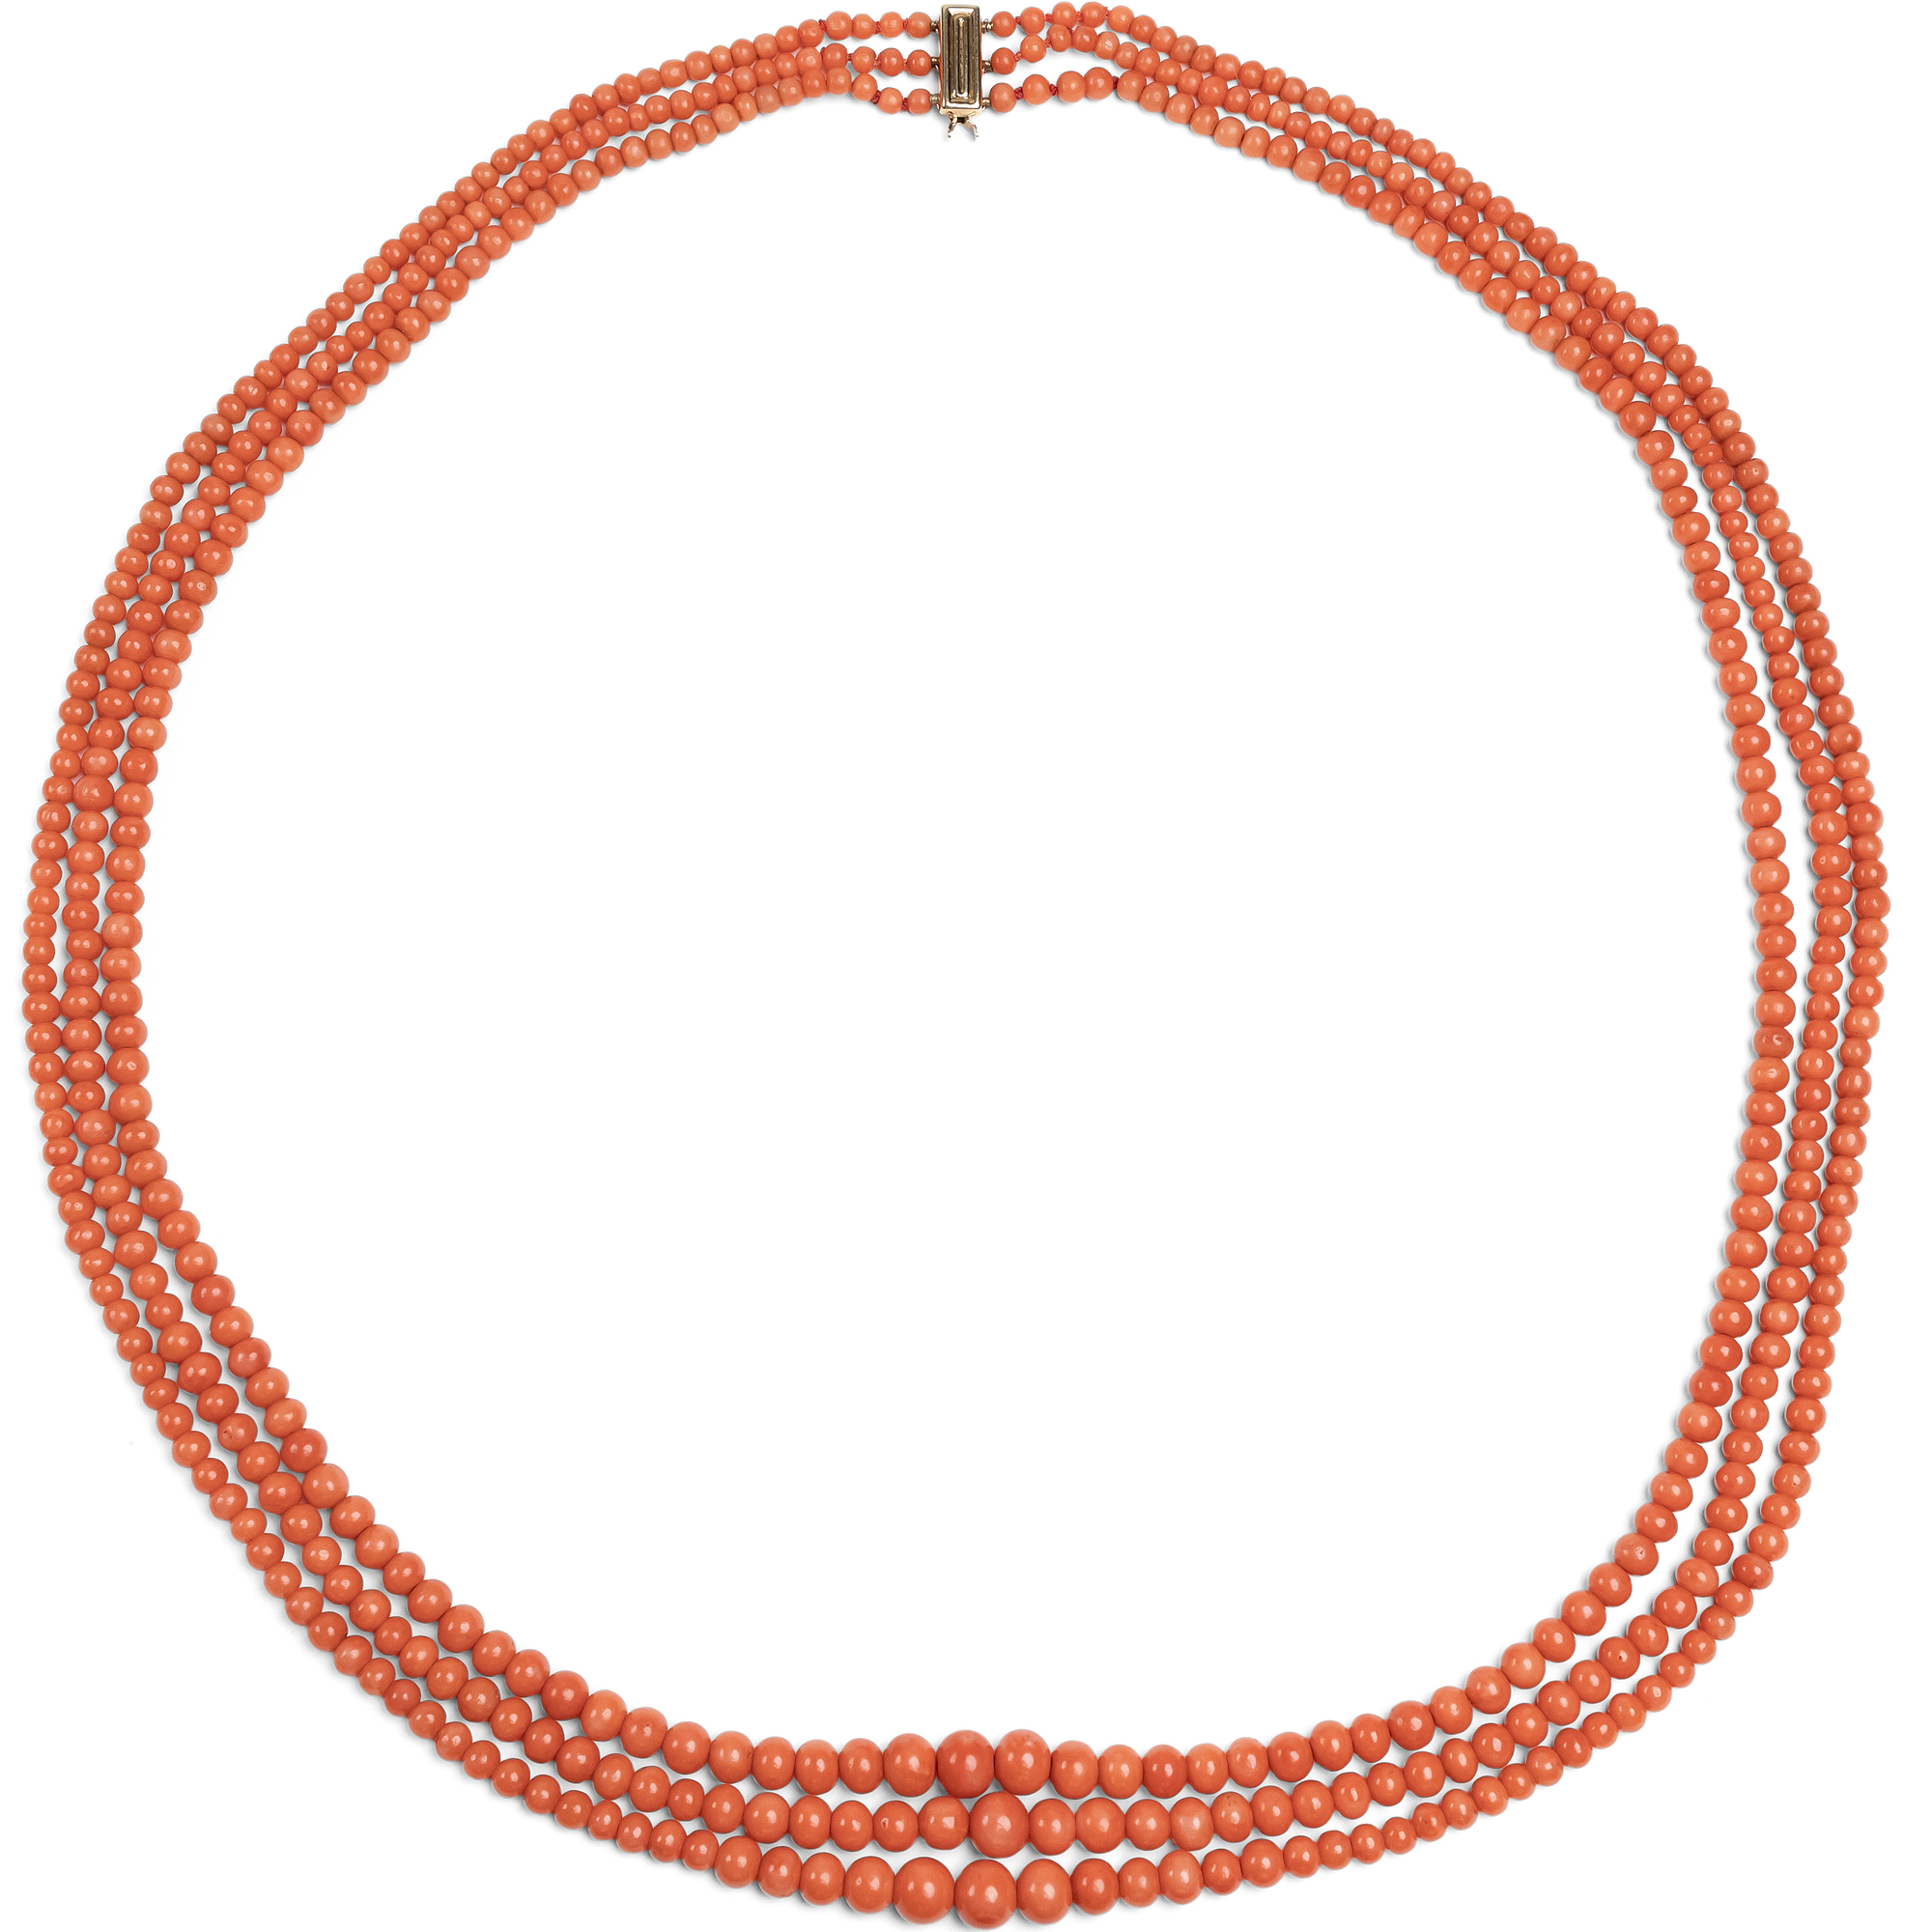 Long Three-Row Salmon Coral Necklace with Gold Clasp, Italy ca. 1890